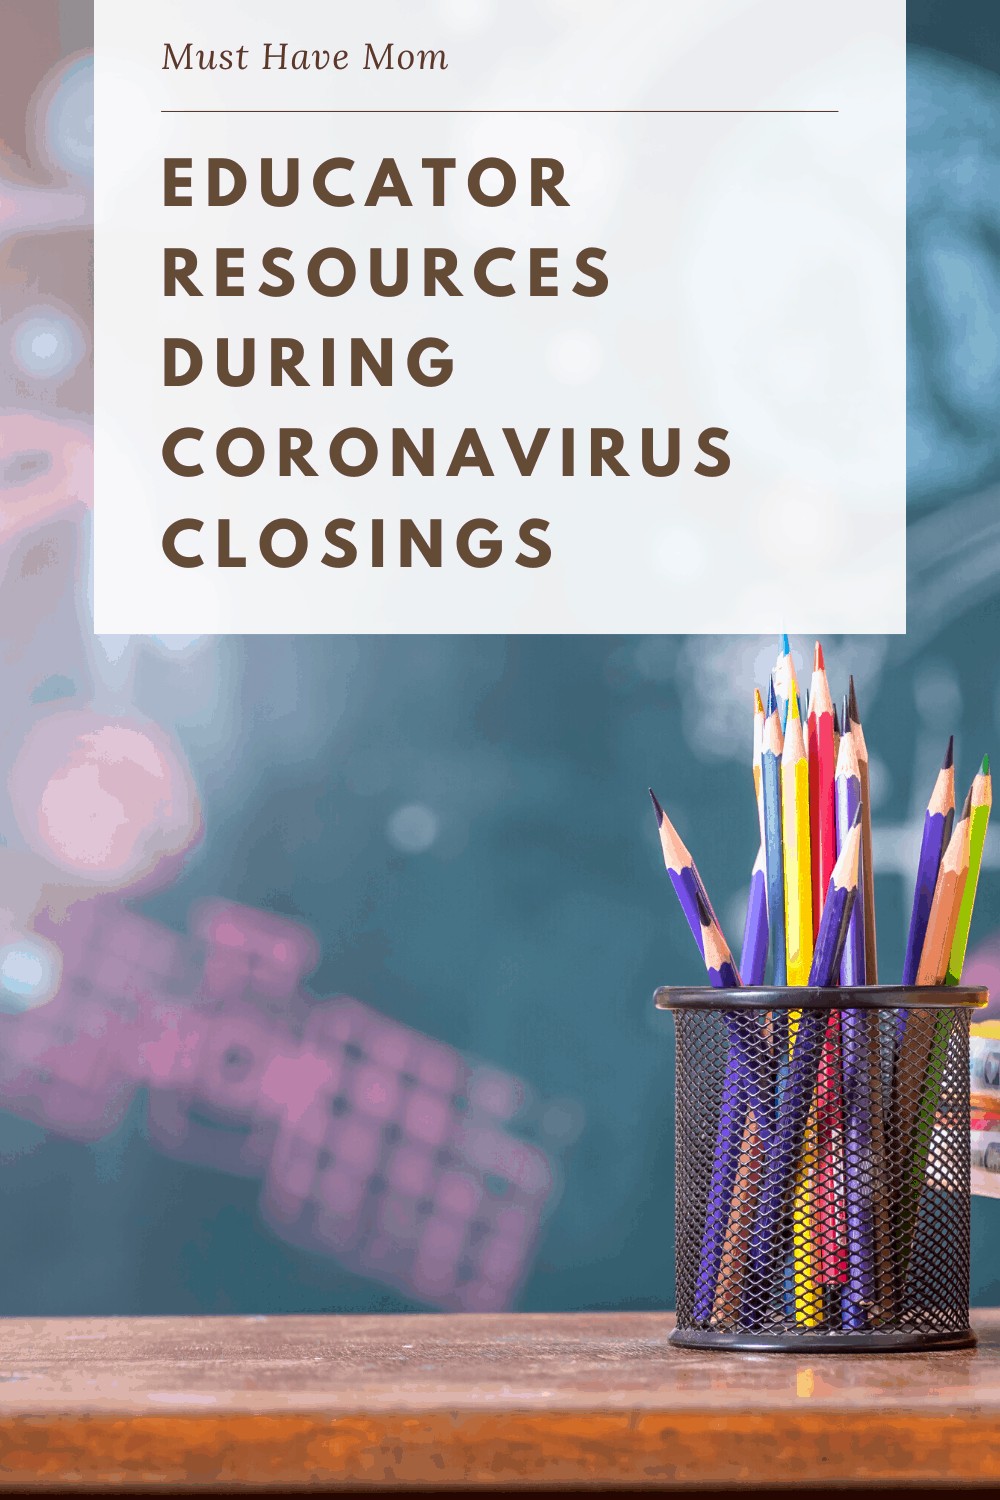 Are you a teacher trying to stay connected with students? A lot of companies are offering free educator resources during Coronavirus closings.